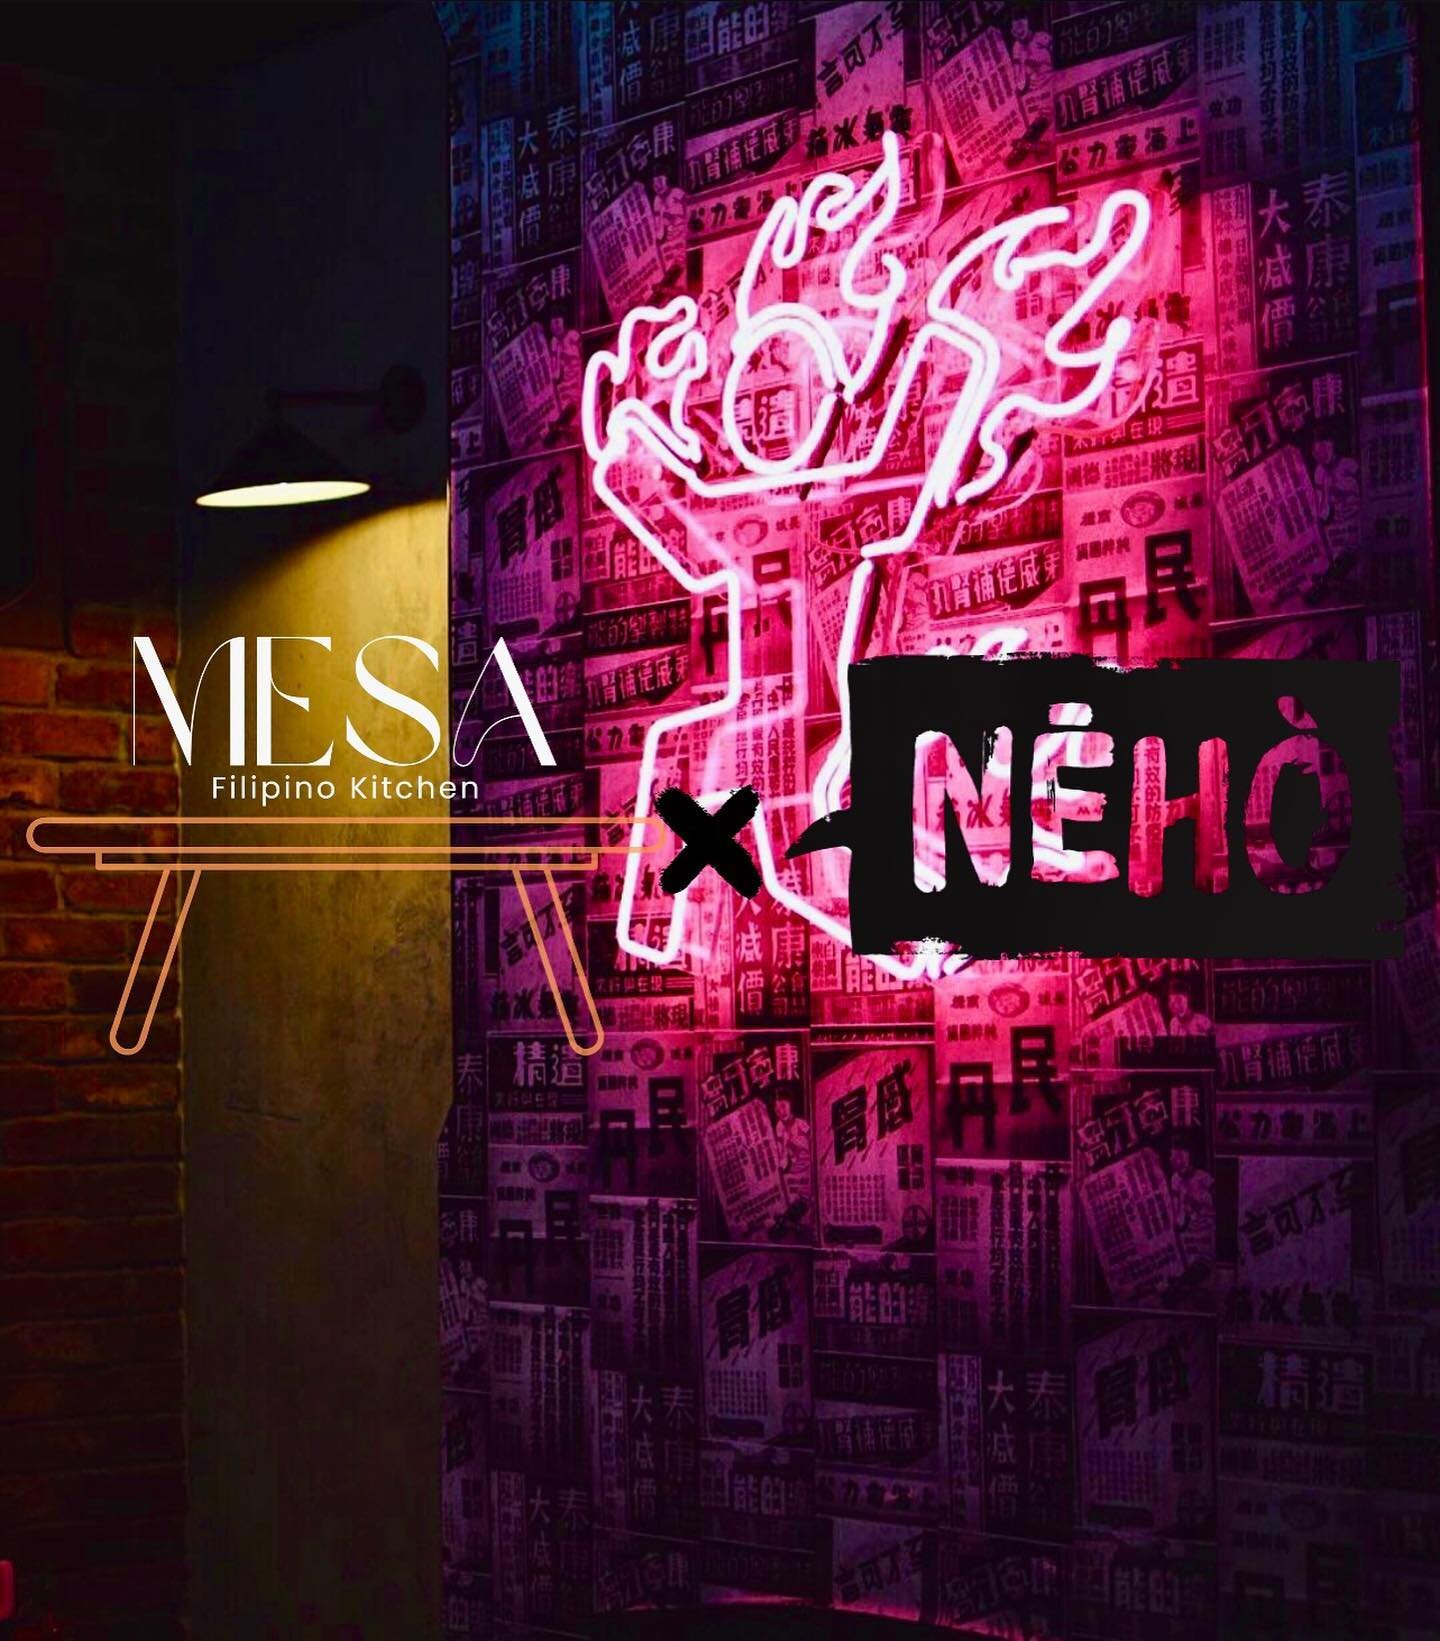 ON JUNE 12 ‼️ WE WILL BE TAKING OVER THE KITCHEN @neho_perth FOR ONE NIGHT ONLY✨ 

🇵🇭 6 COURSE SET MENU OF MODERN FILIPINO DISHES 

🍻 BAR WILL BE OPEN ALL NIGHT SLINGING COCKTAILS, WINES AND BEERS

😎 GOOD VIBES AND GREAT FOOD

Head to our website